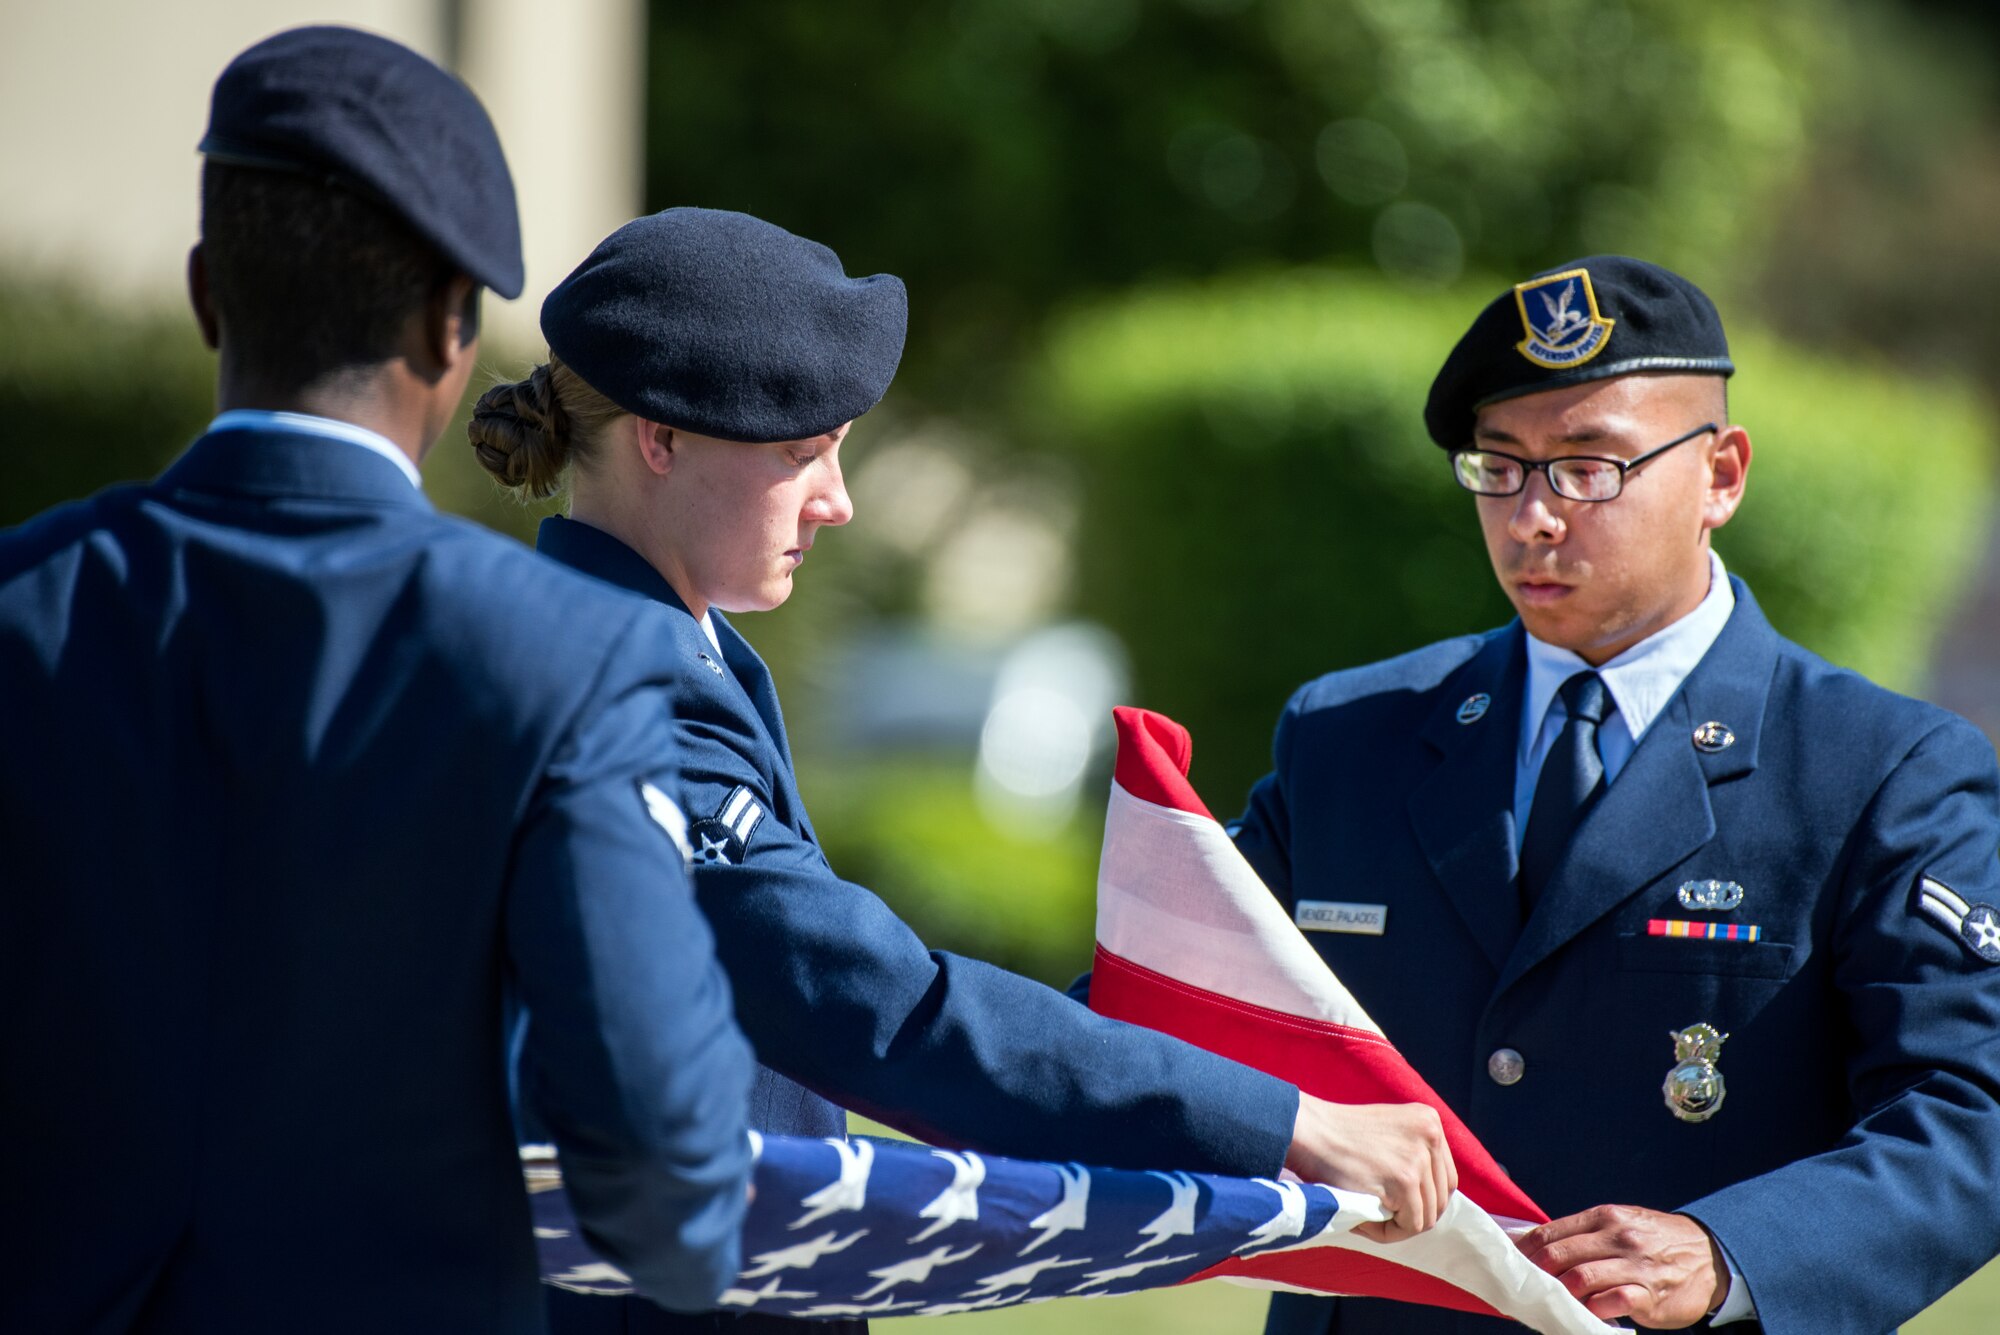 Defenders from the 60th Security Forces Squadron, Travis Air Force Base, Calif., perform a retreat ceremony May 18, 2017. The ceremony was one of several events sponsored by the squadron in honor of Police Week. (U.S. Air Force photo by Louis Briscese)